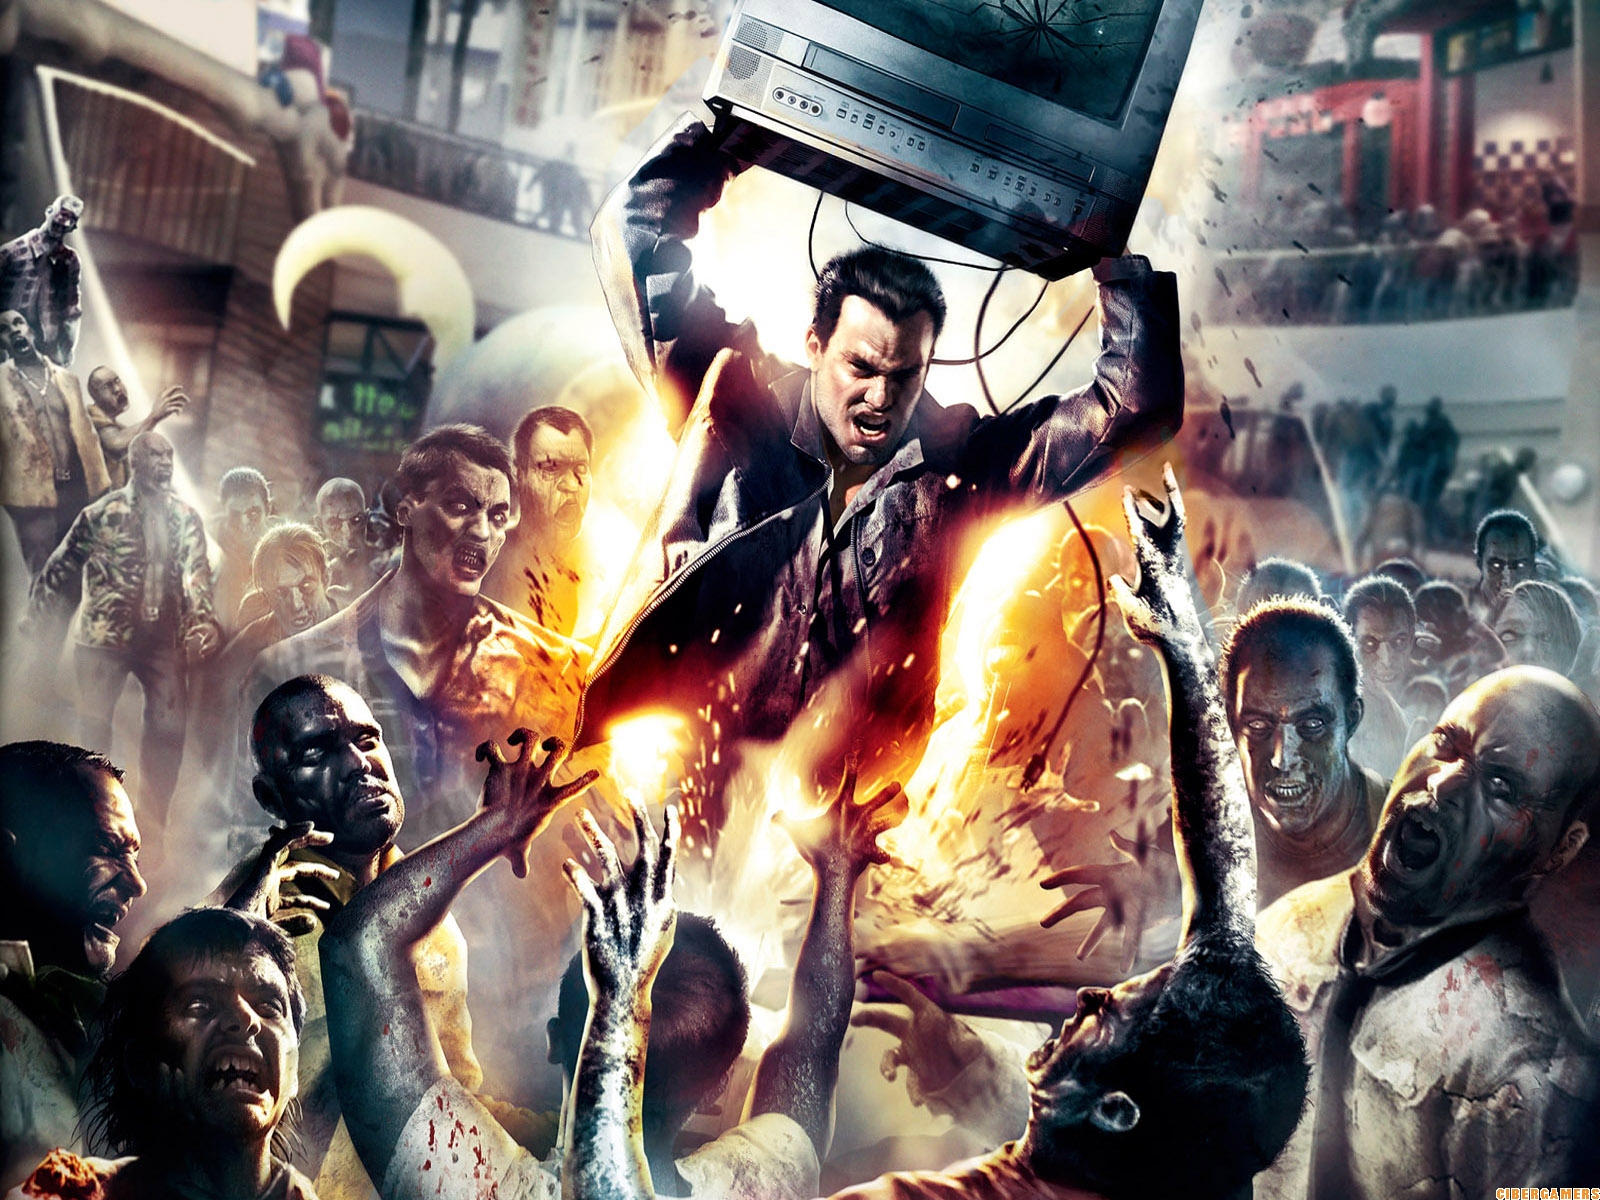 dead rising 4 wallpaper,action adventure game,pc game,games,cg artwork,strategy video game